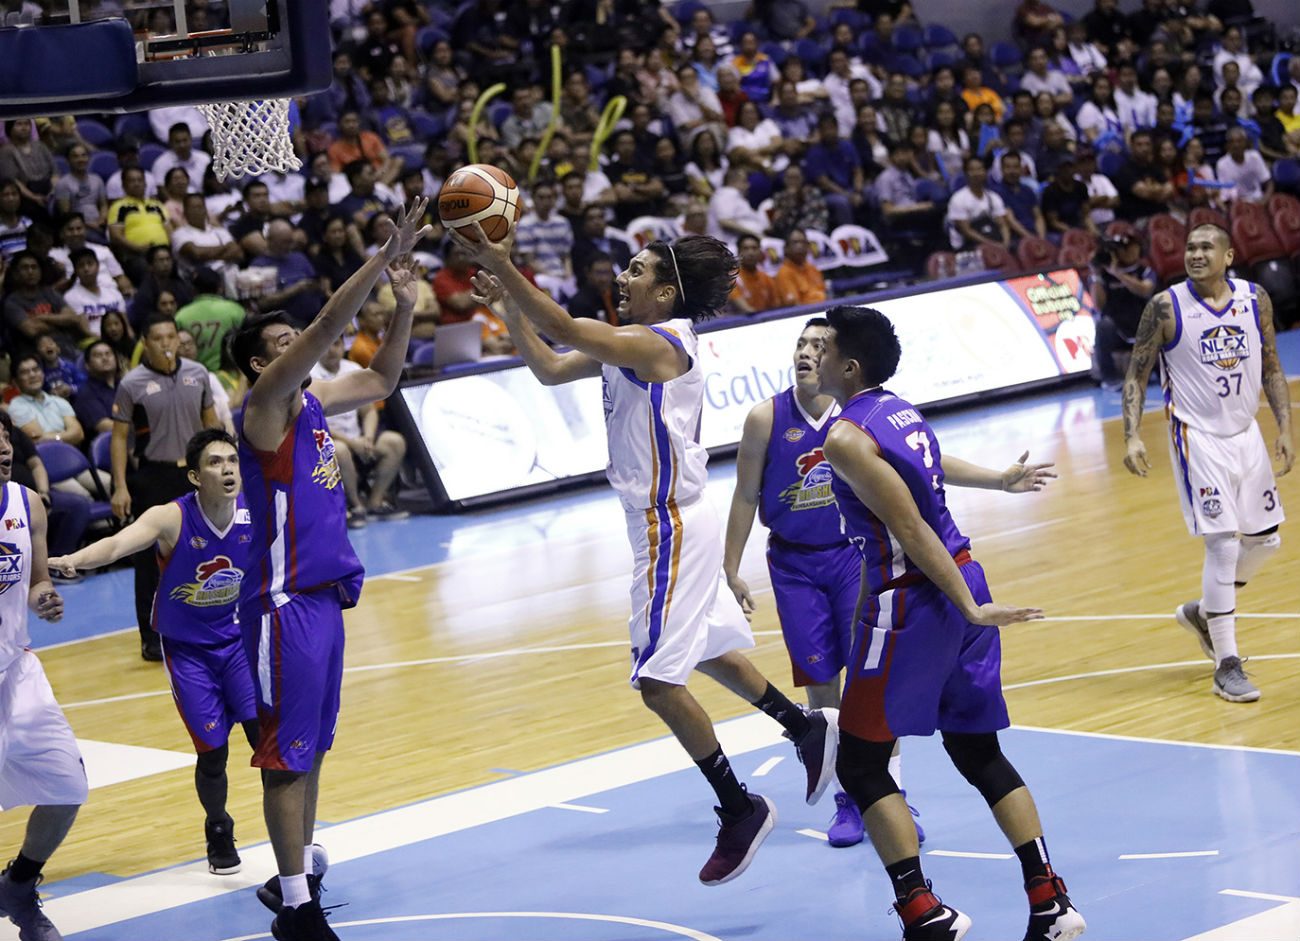 Magnolia clips NLEX in Game 6, advances to PH Cup finals